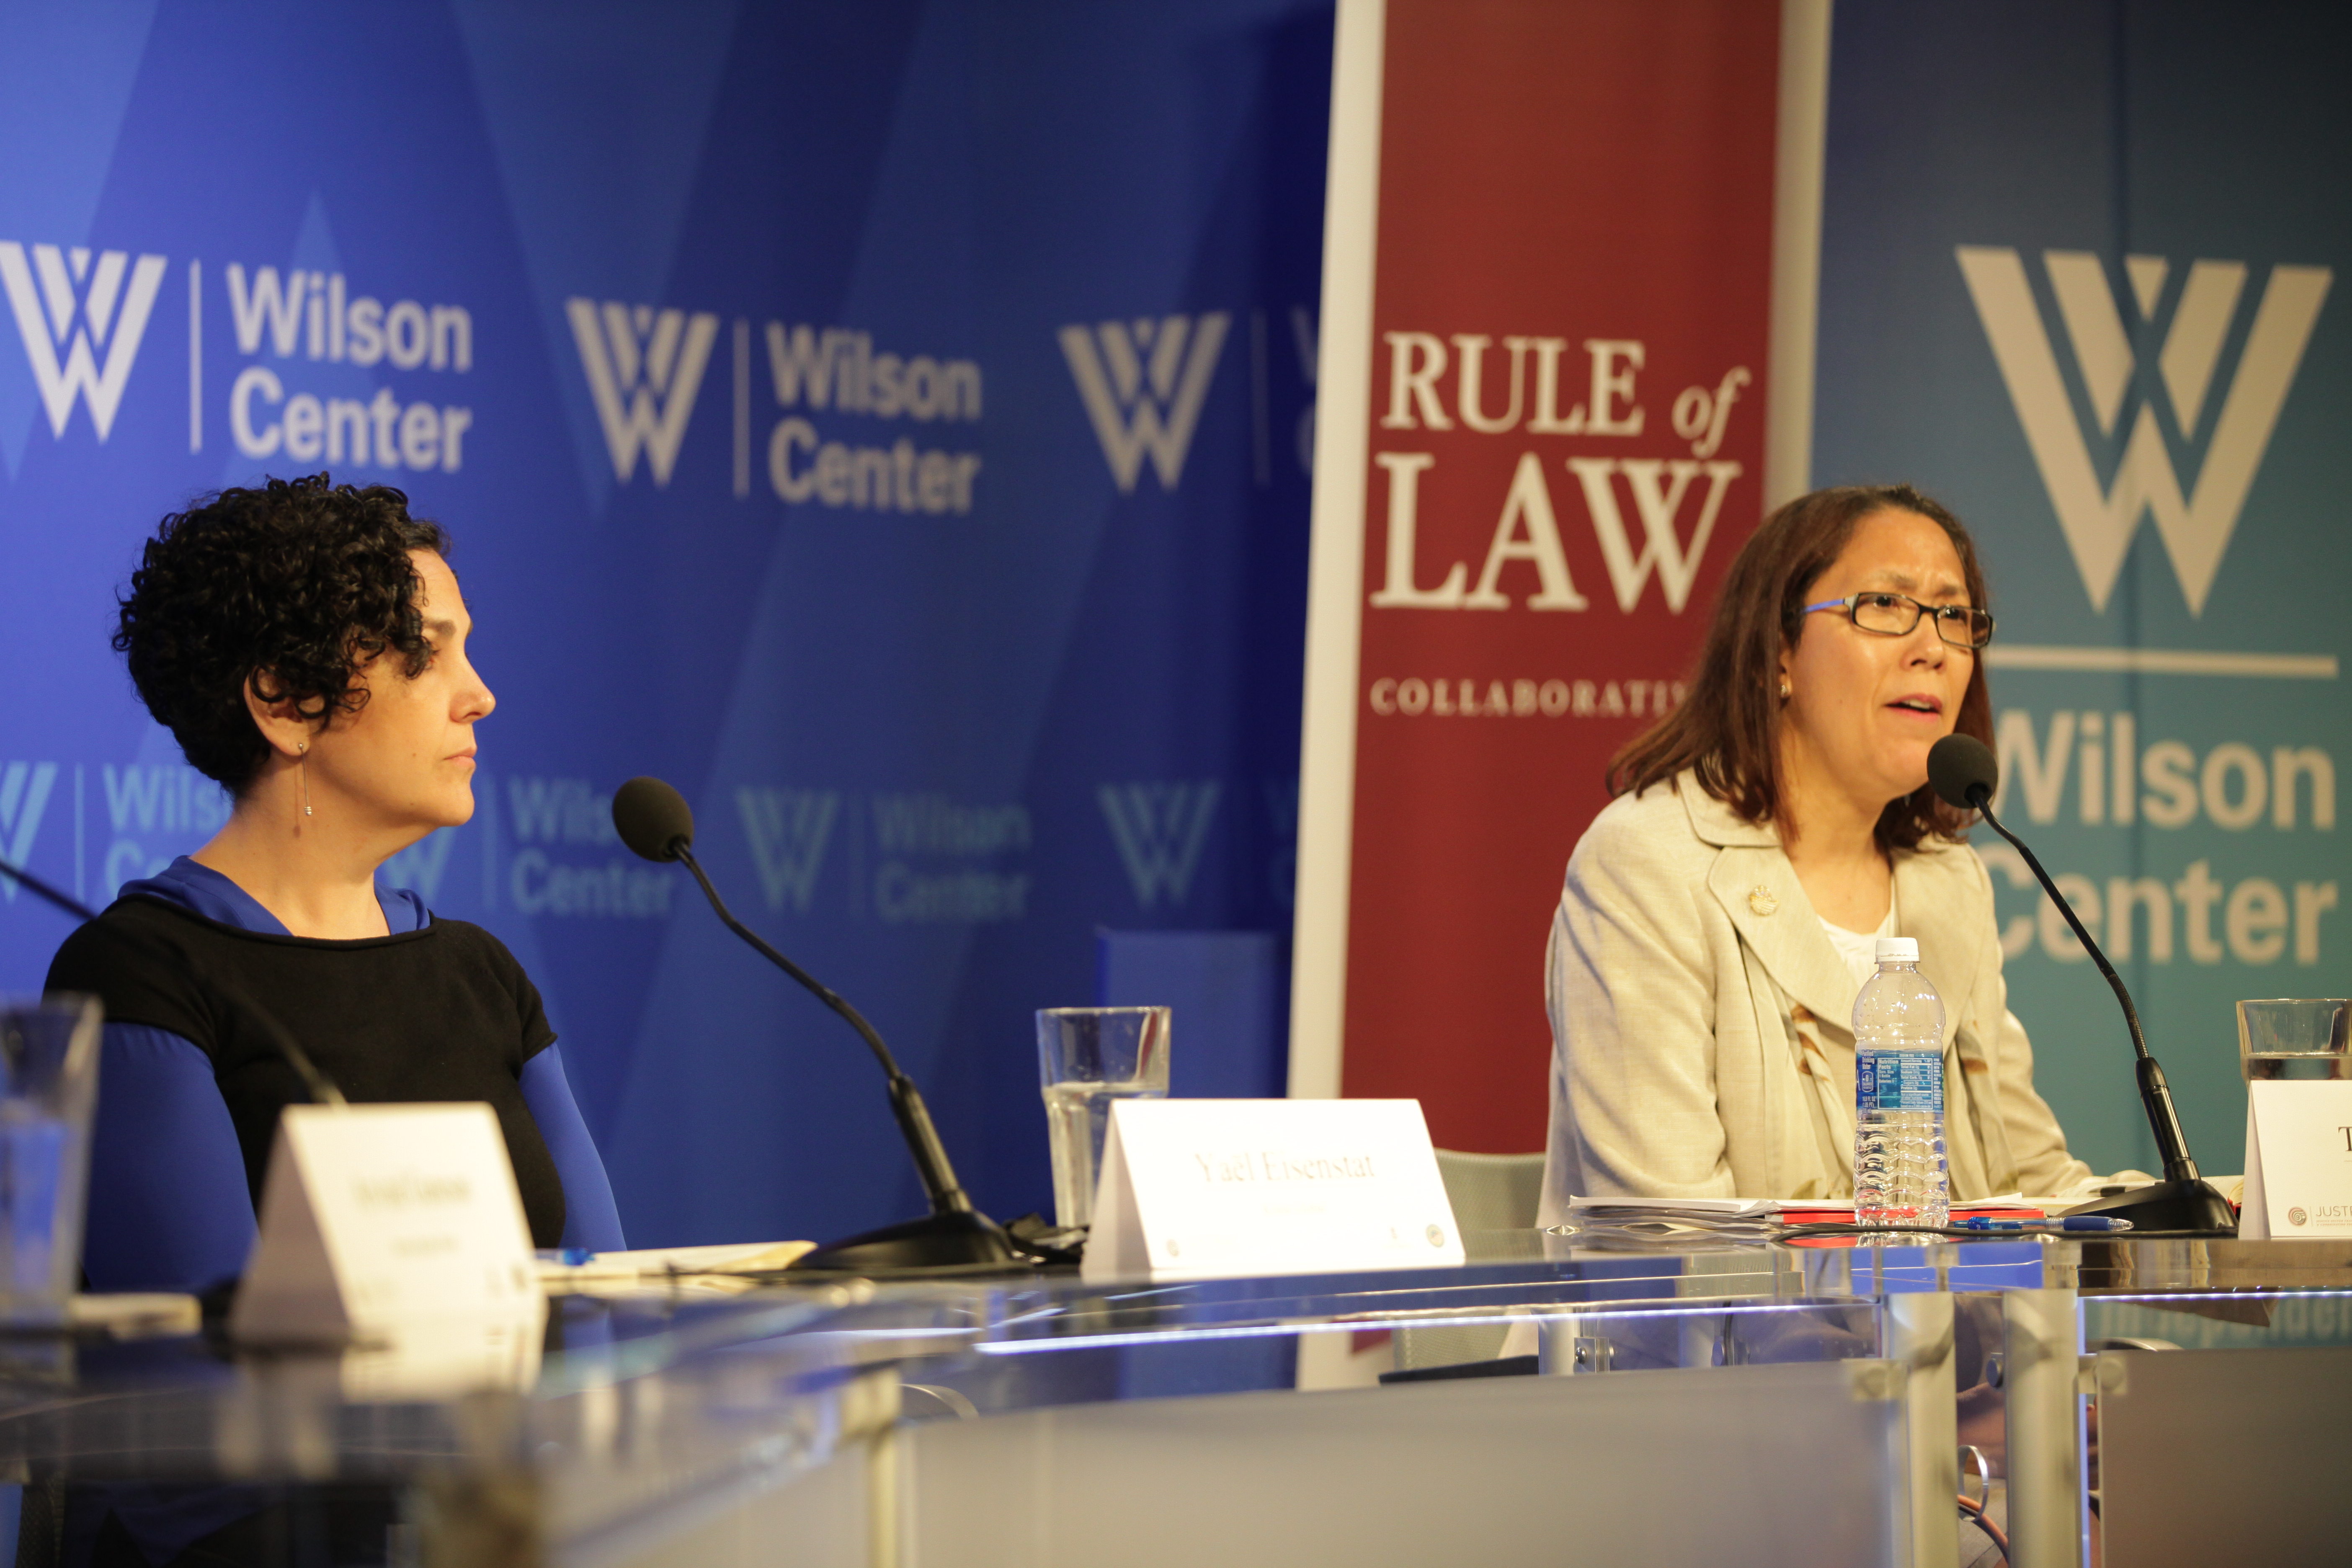 WATCH: JUSTRAC Symposium on Private Enterprise and Rule of Law